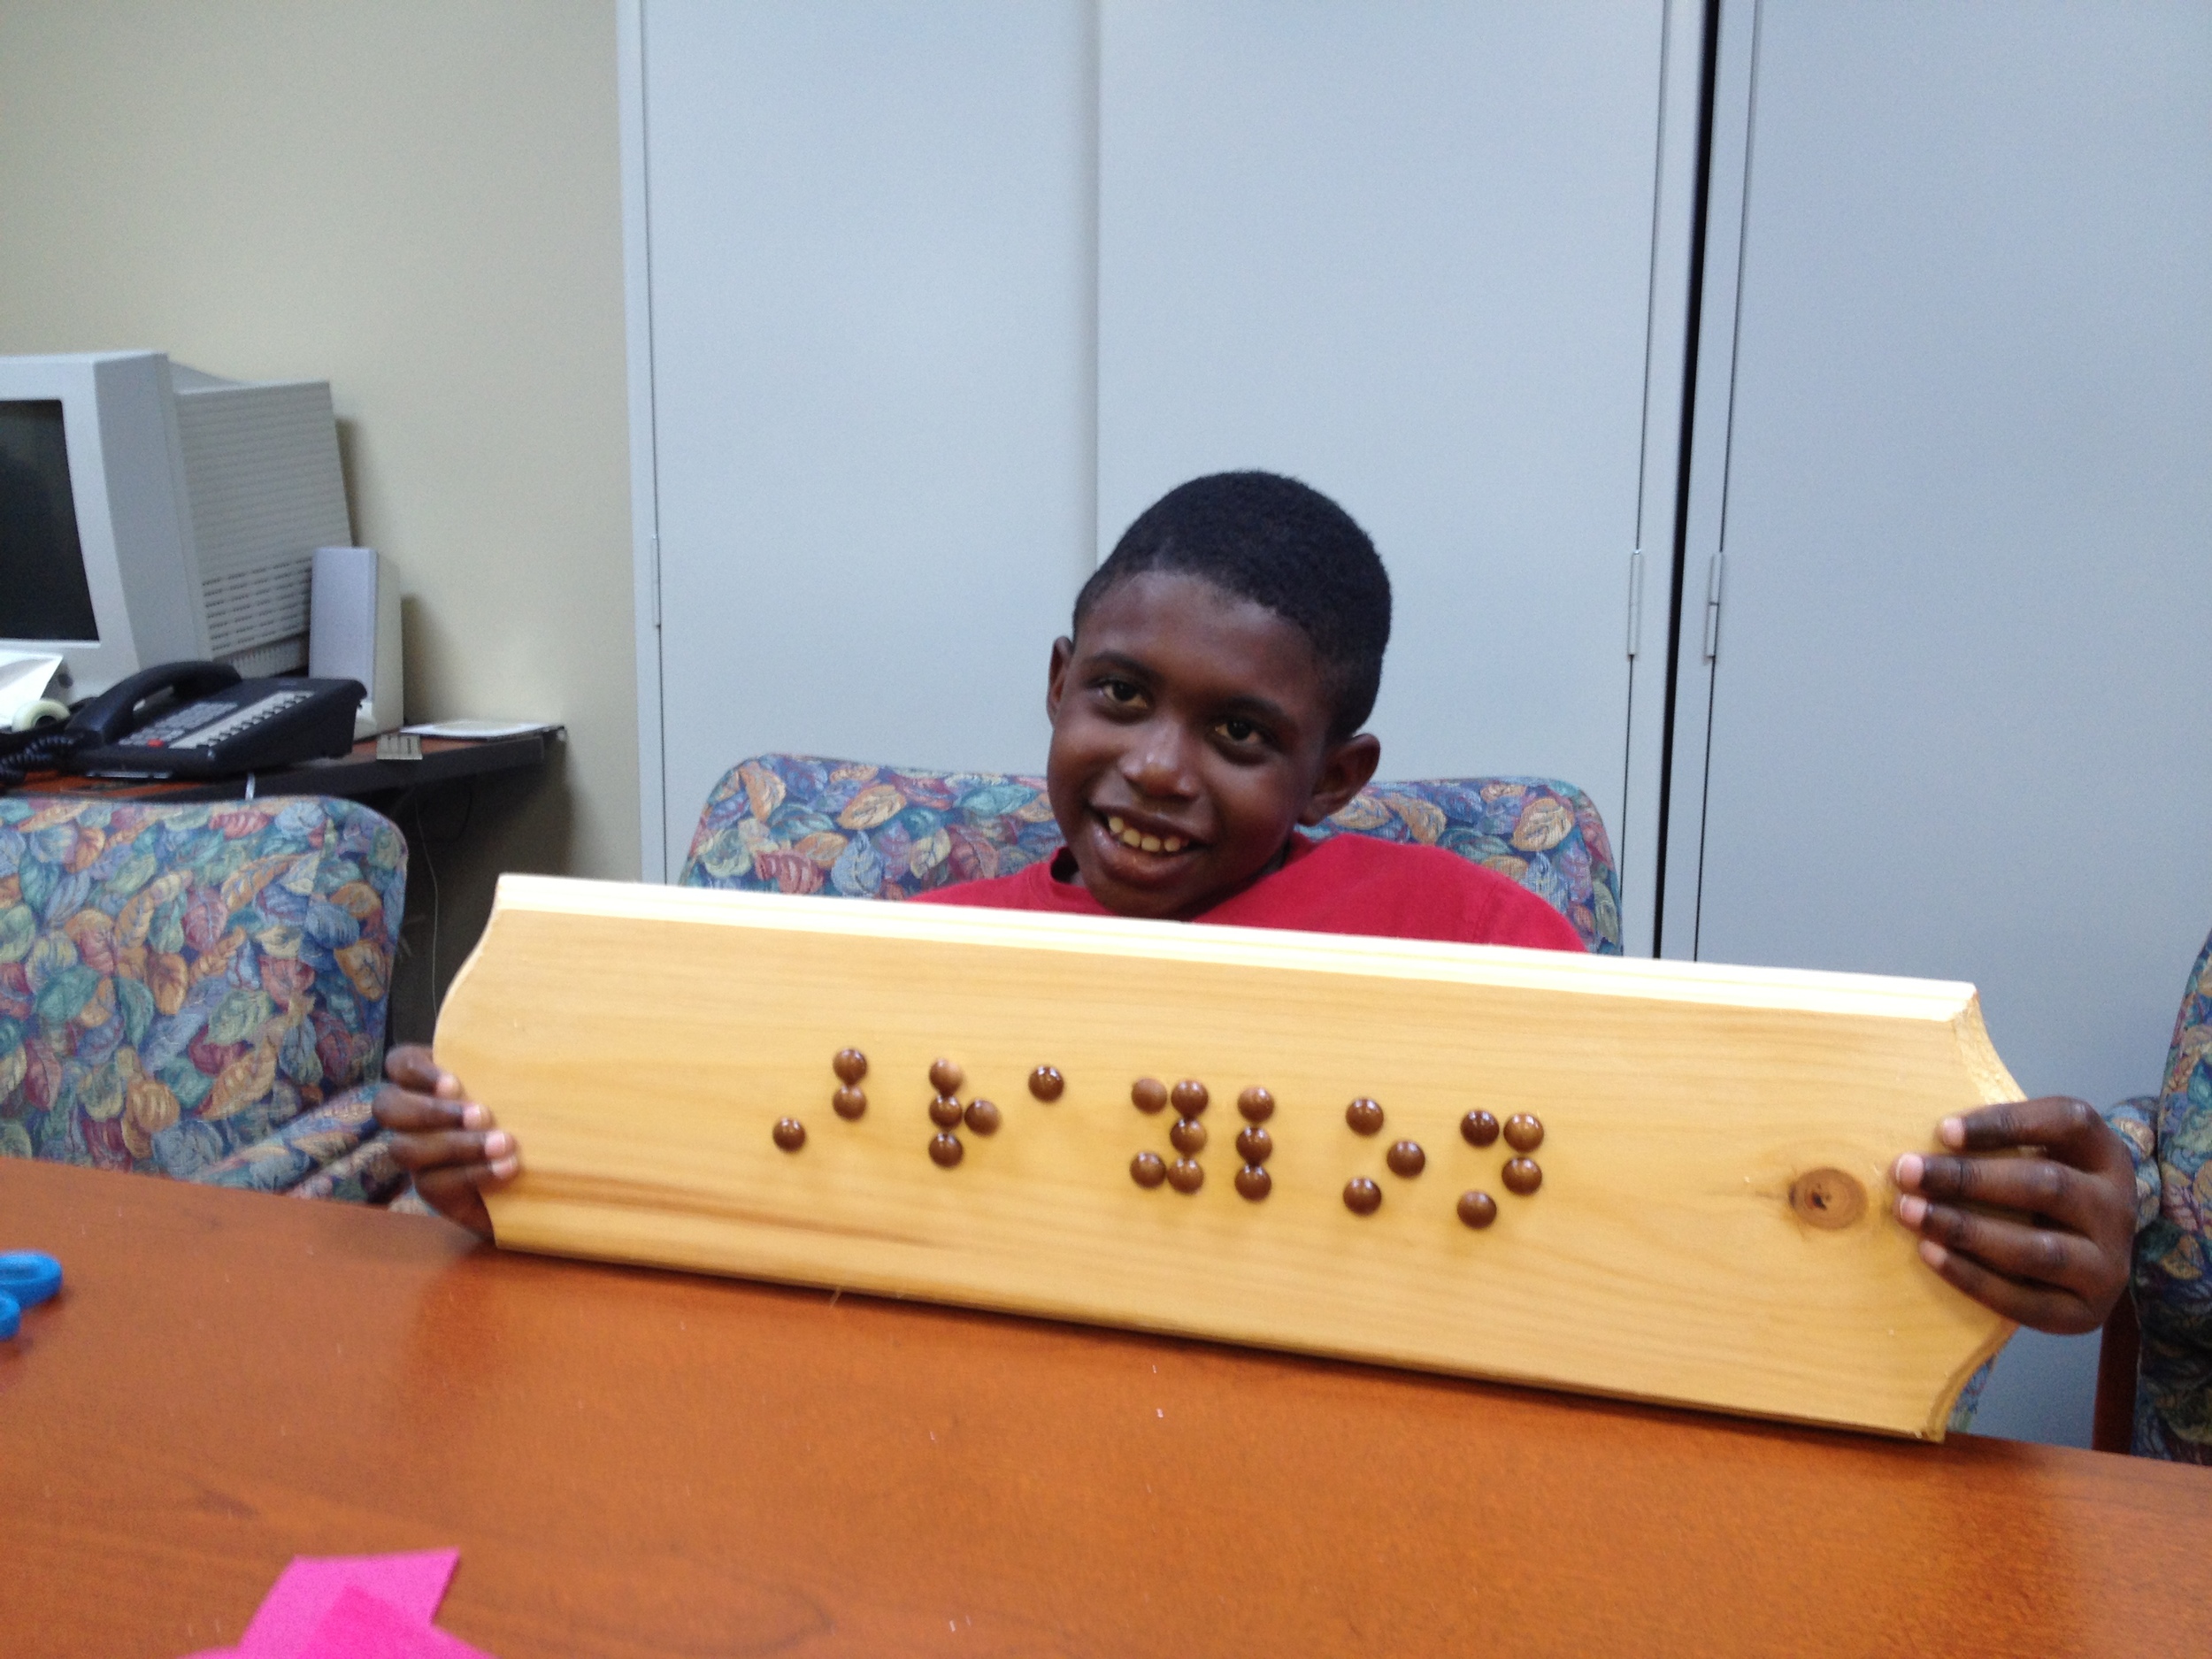 Braylon shows off his braille name plate made during the 2013 NFB BELL program